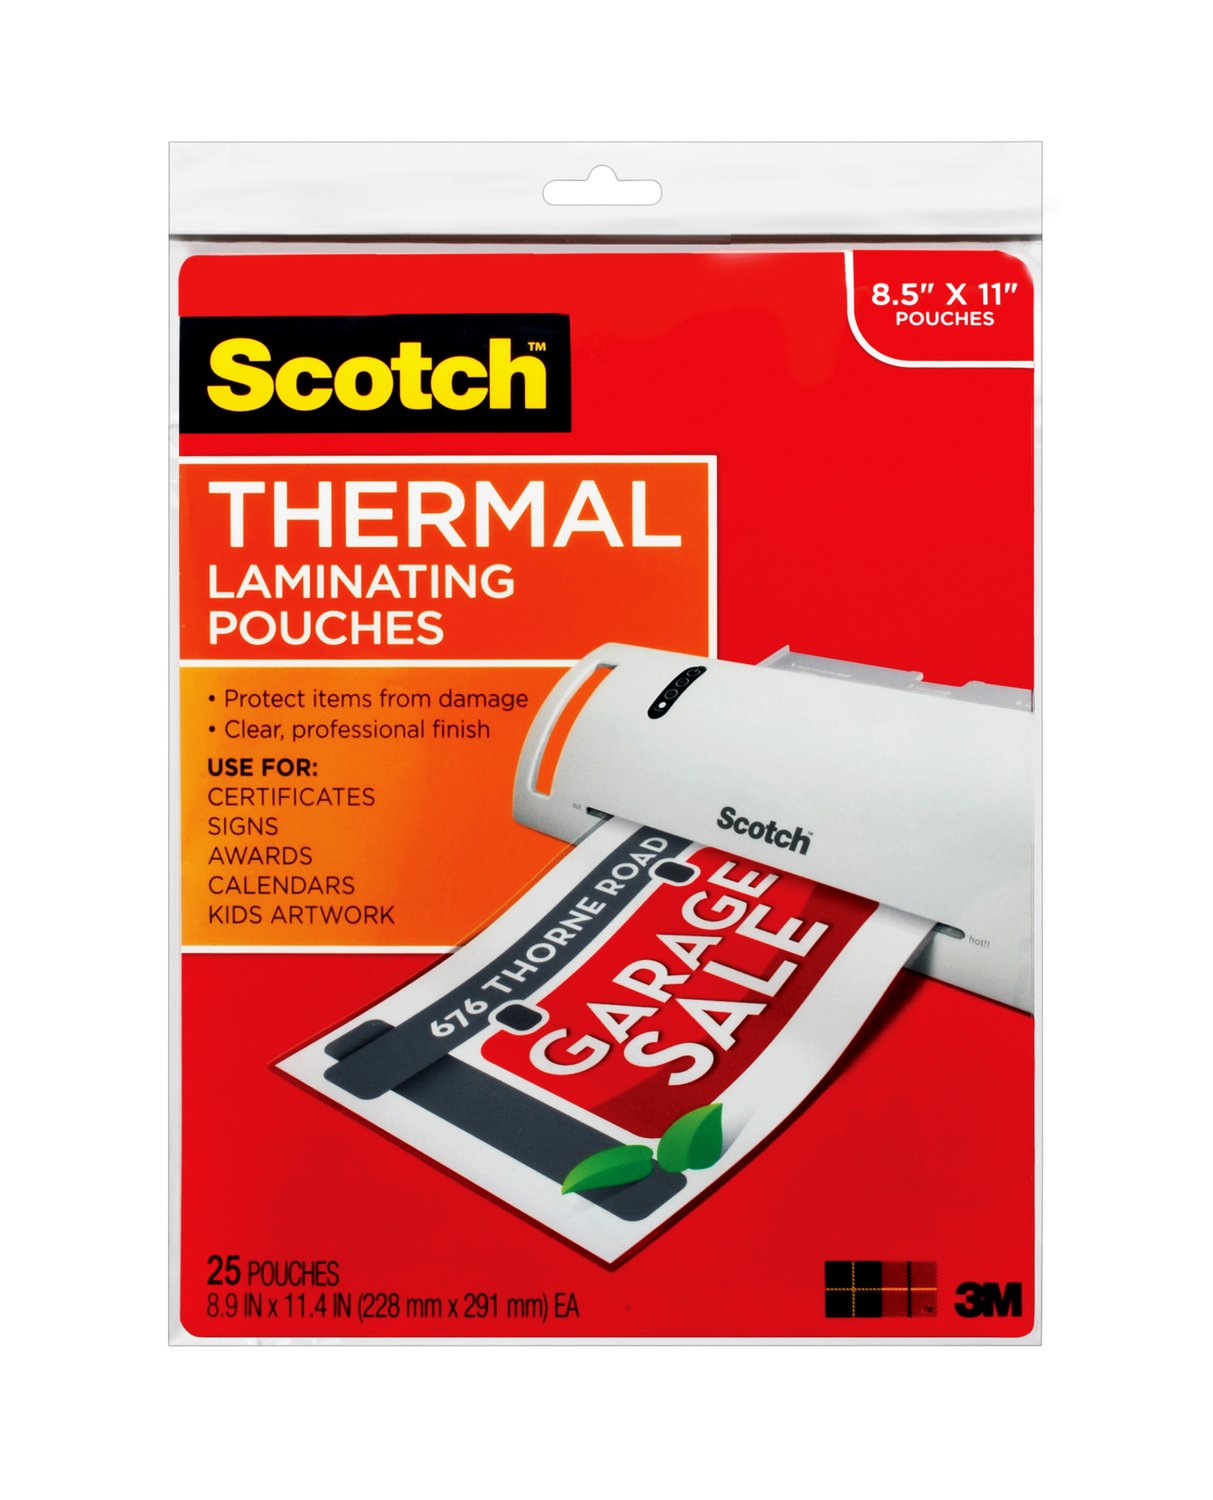 7010332810 - Scotch Thermal Laminating Pouches TP3854-25, 8.9 in x 11.4 in (228 mm x
291 mm) 25 PK